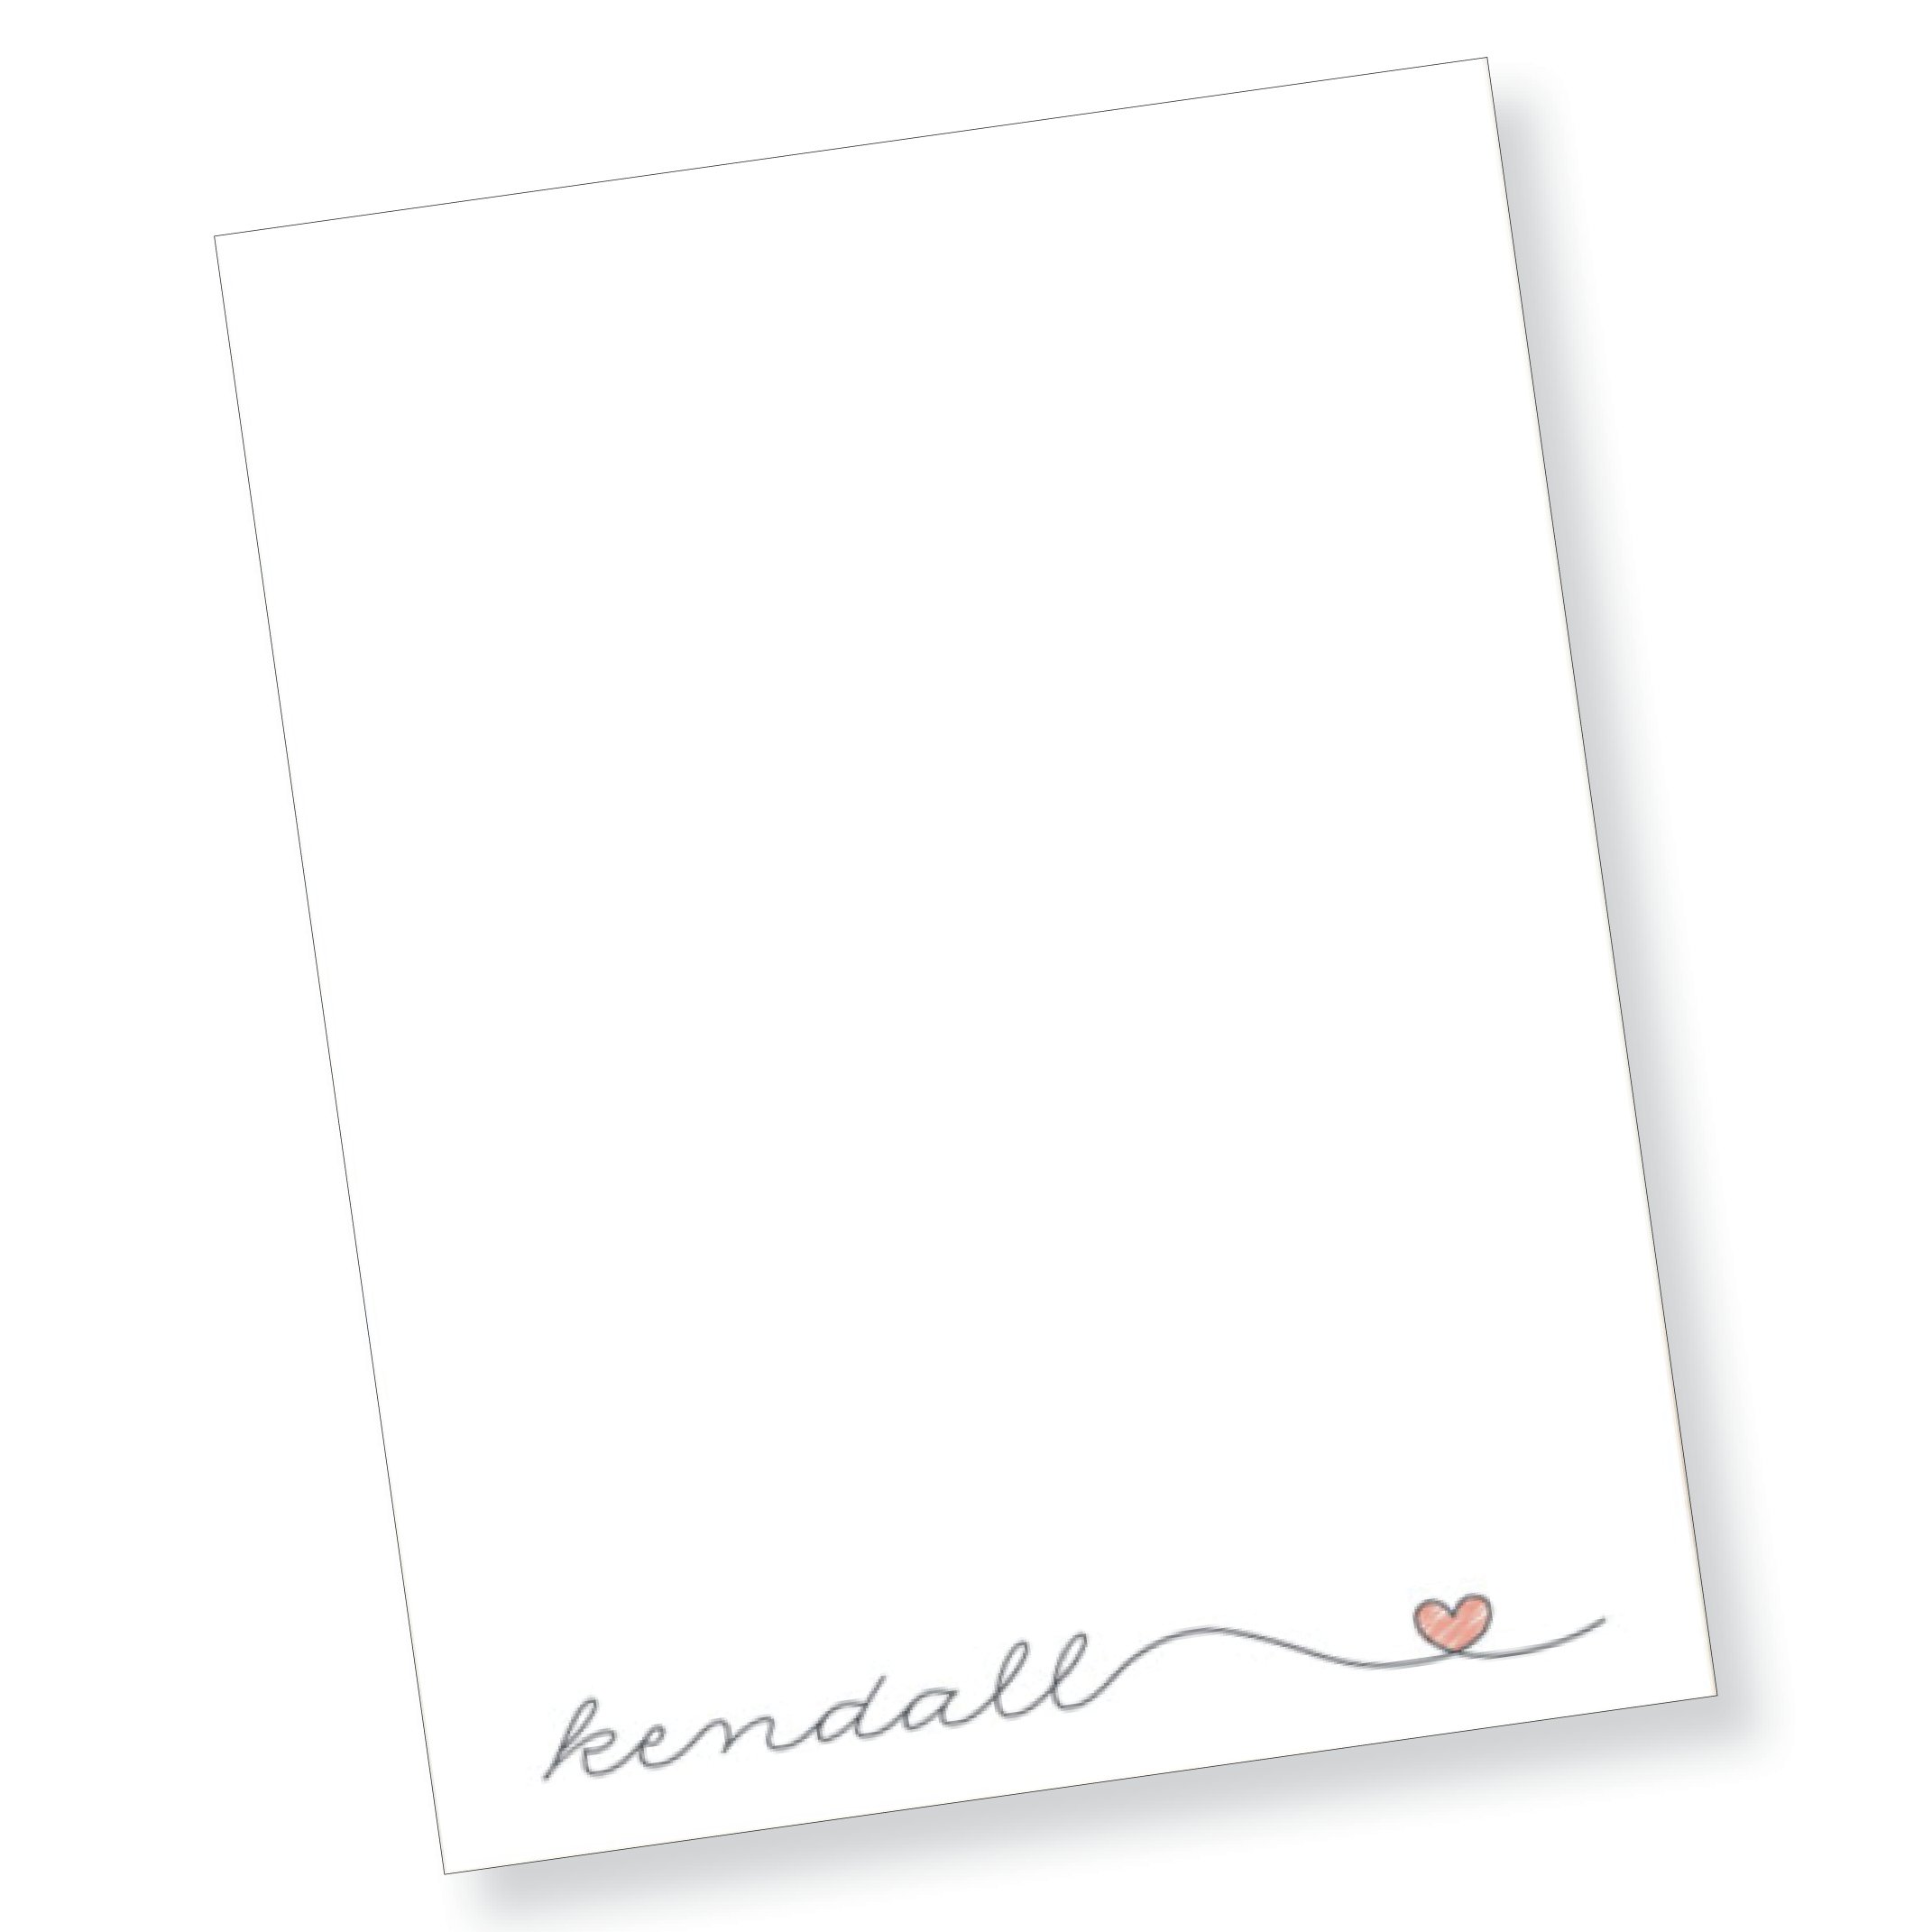 With Love Personal Stationery (Copy)